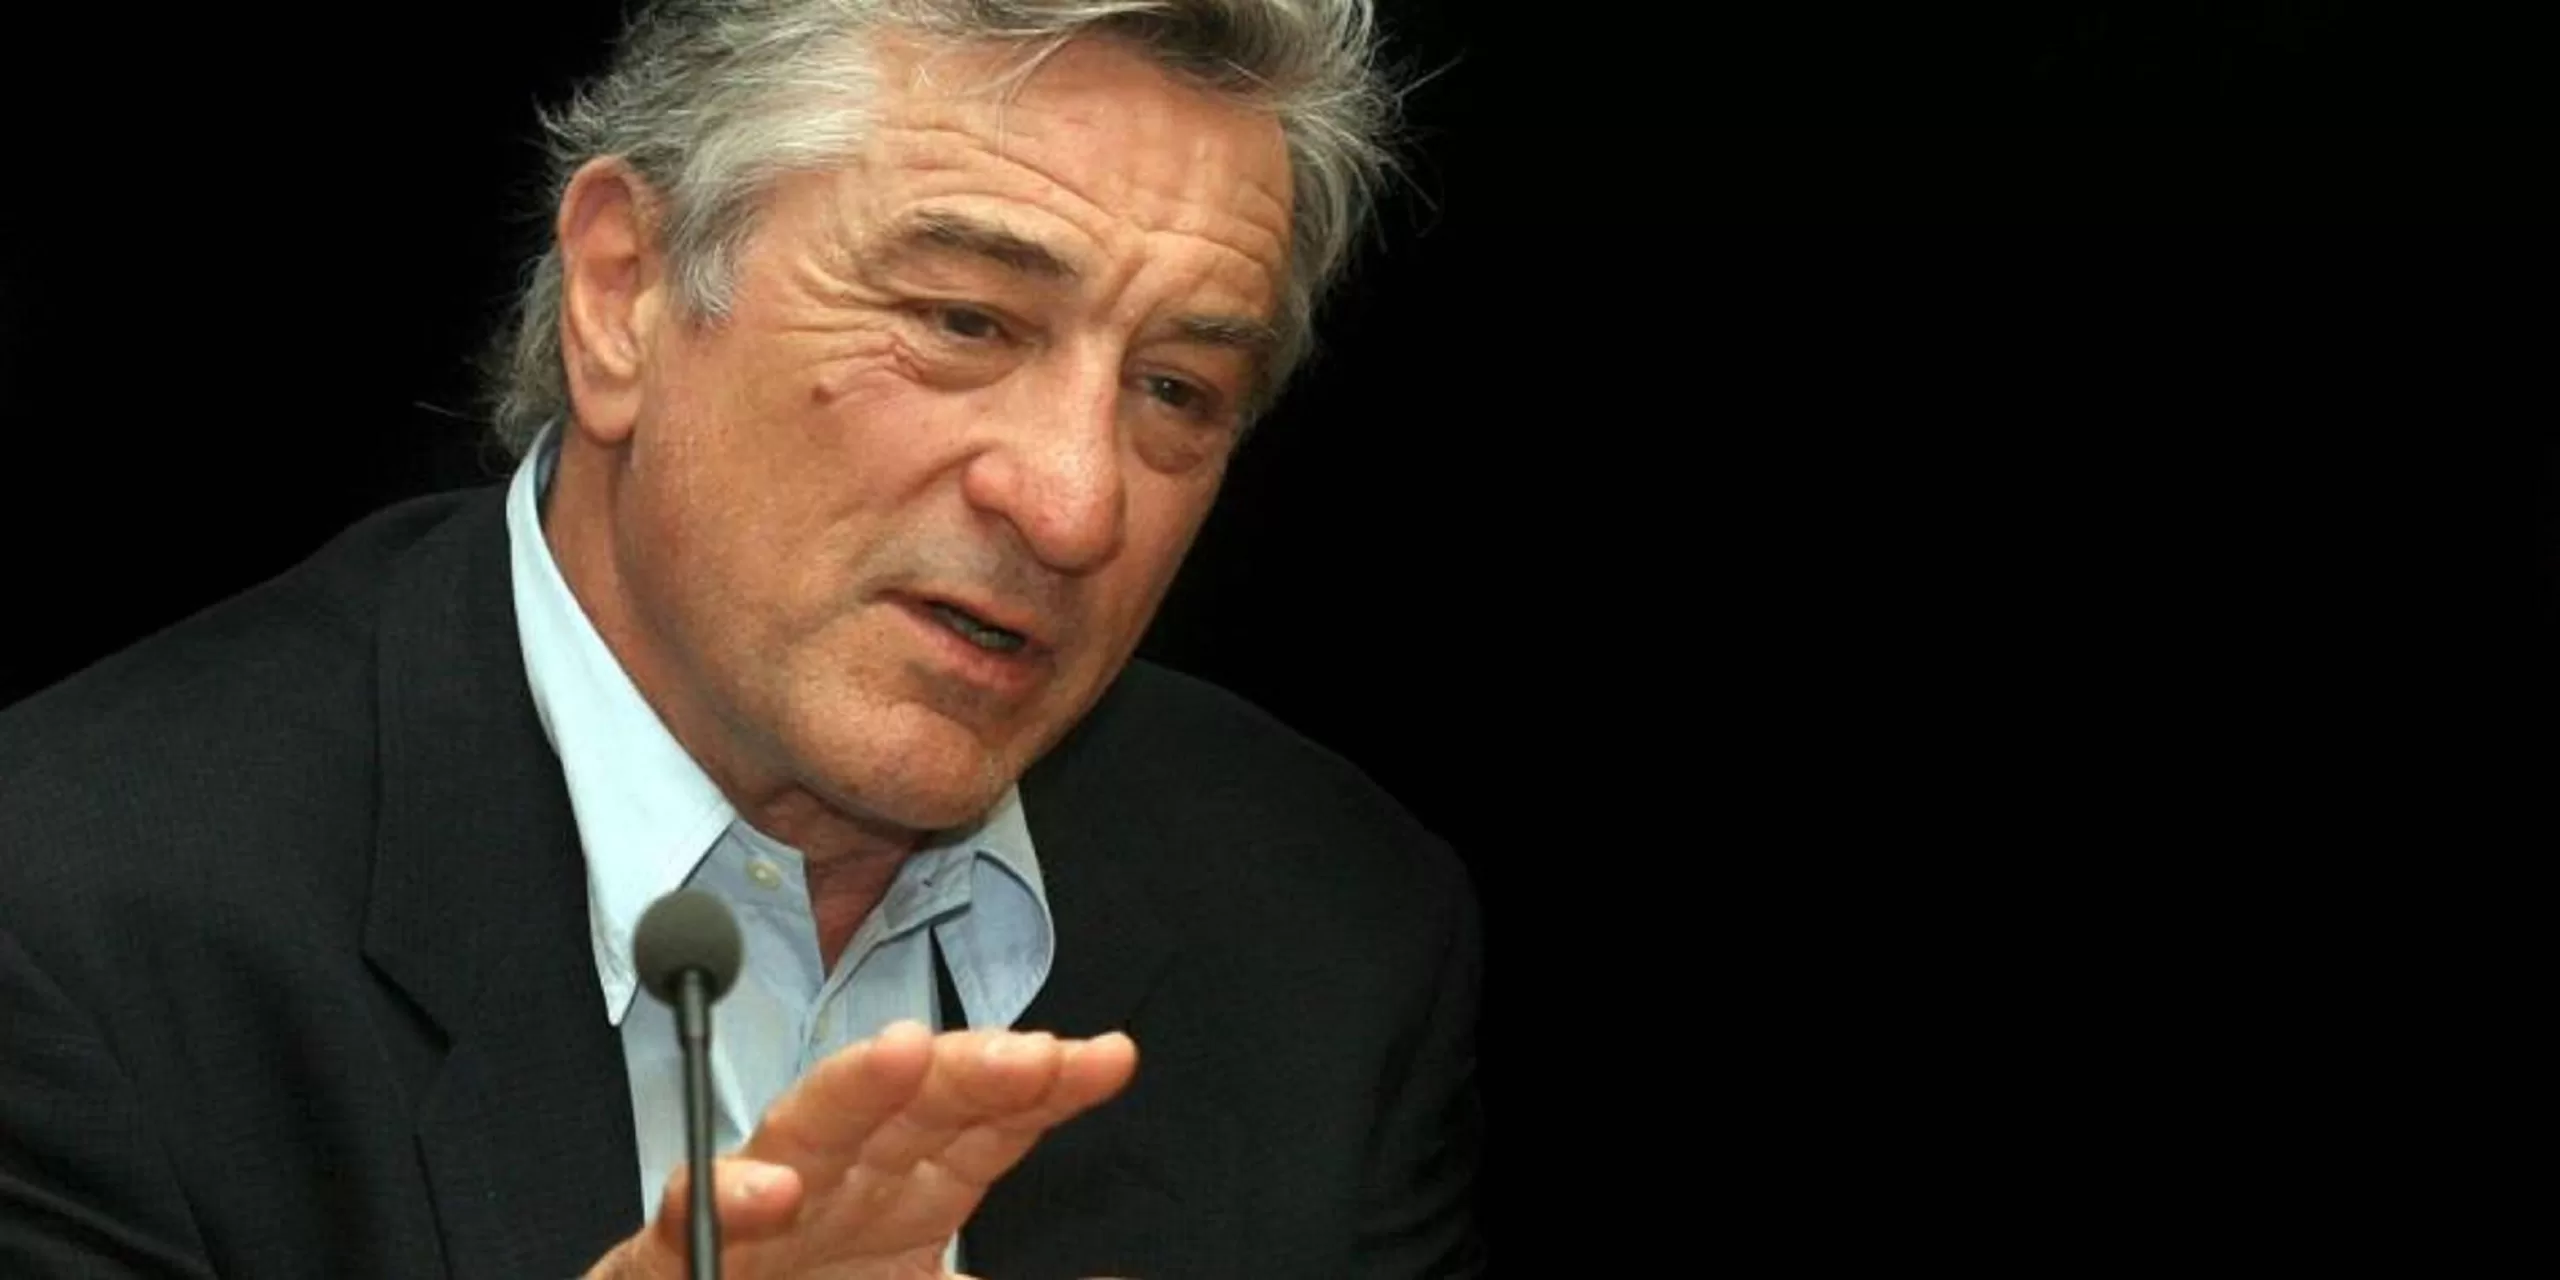 Robert de Niro turns 80 and does not stop: these are the films he will launch
